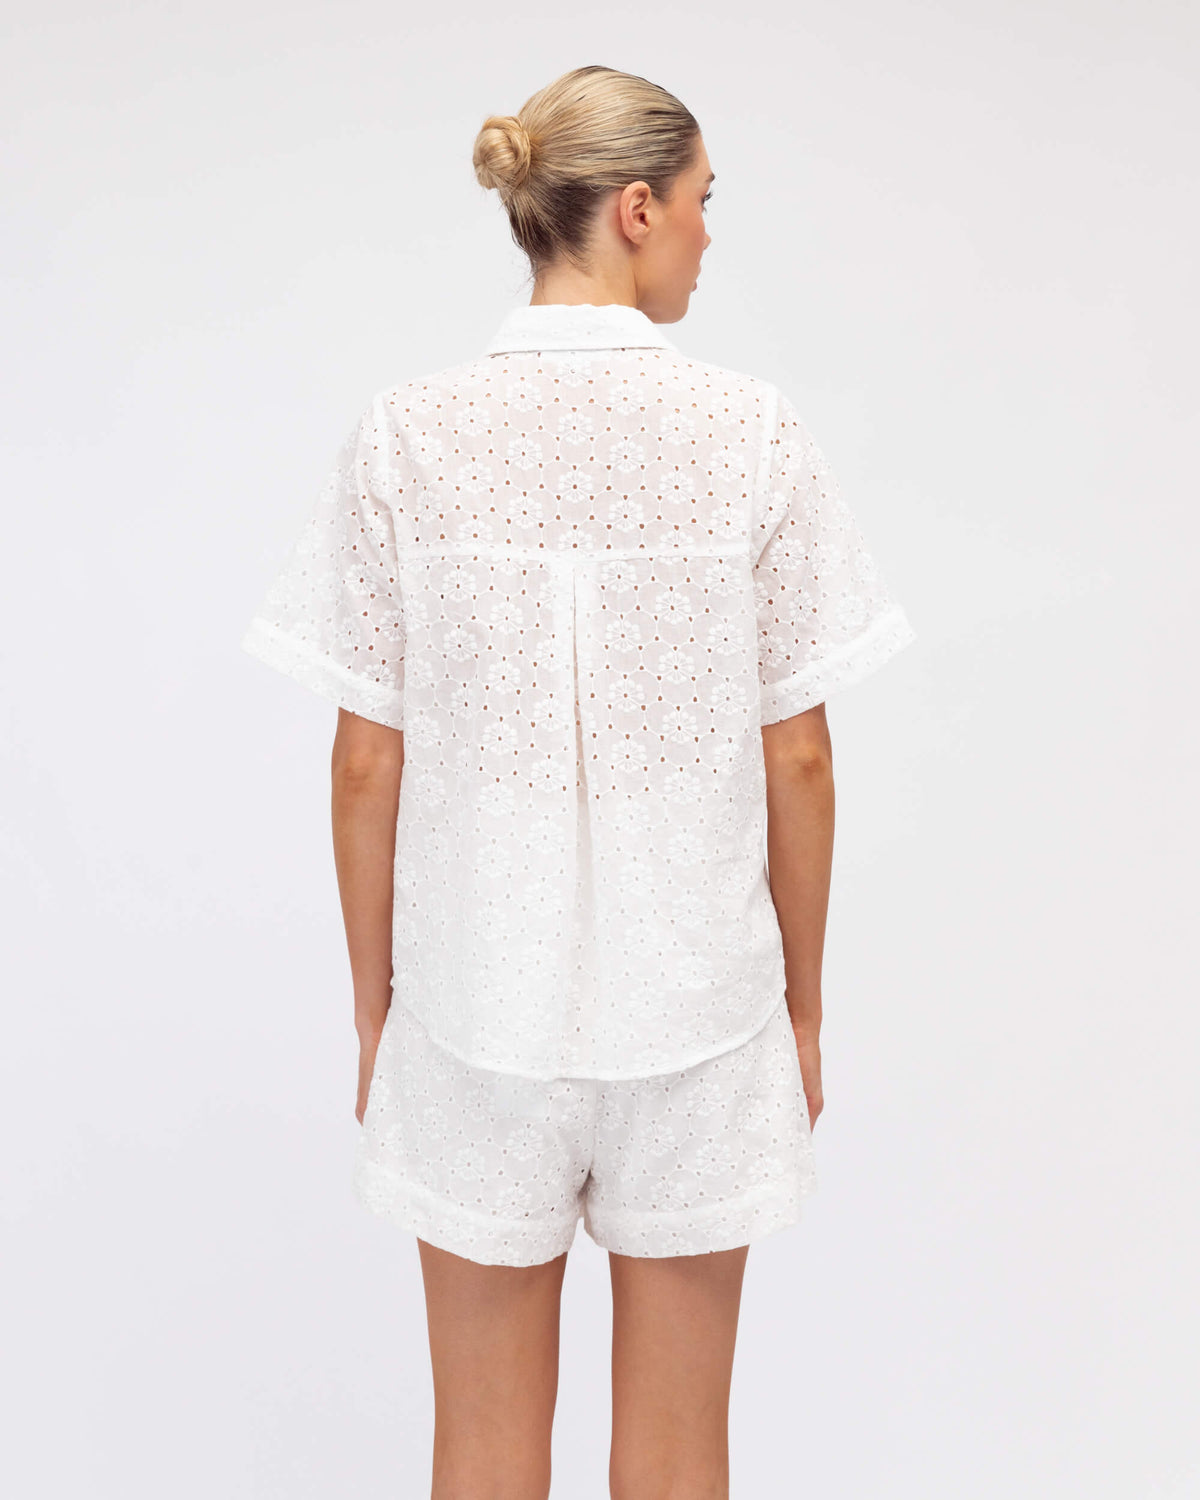 WHITE BRODERIE CO-ORD SHIRT